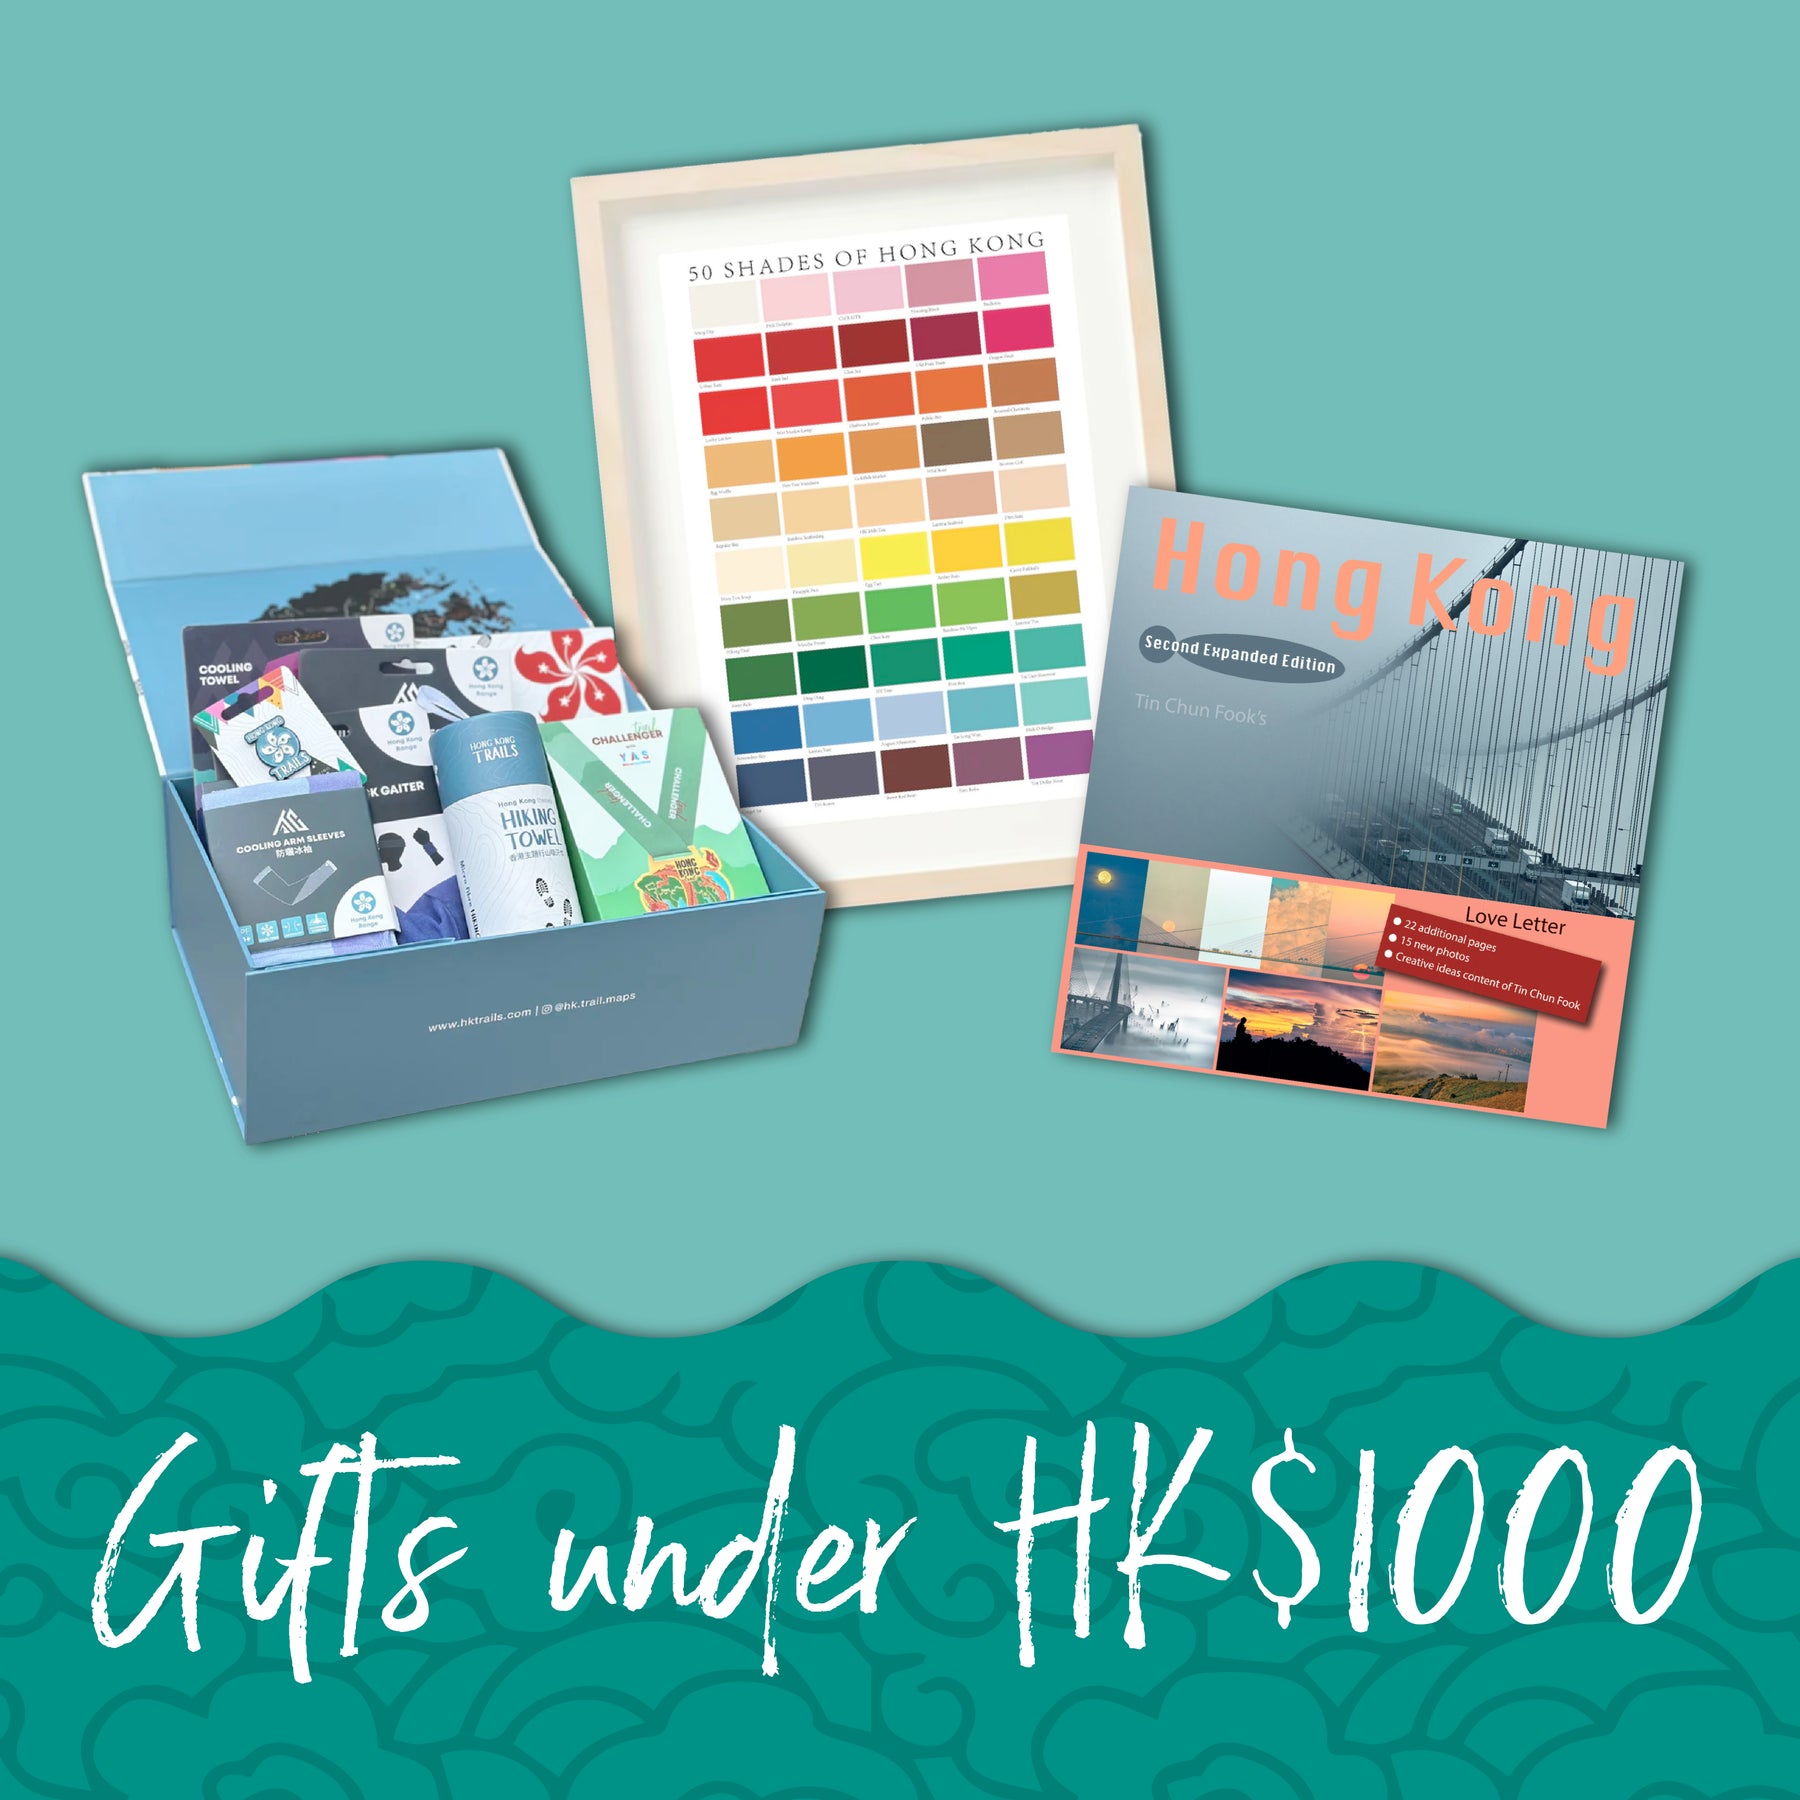 Gifts Under HK$1000